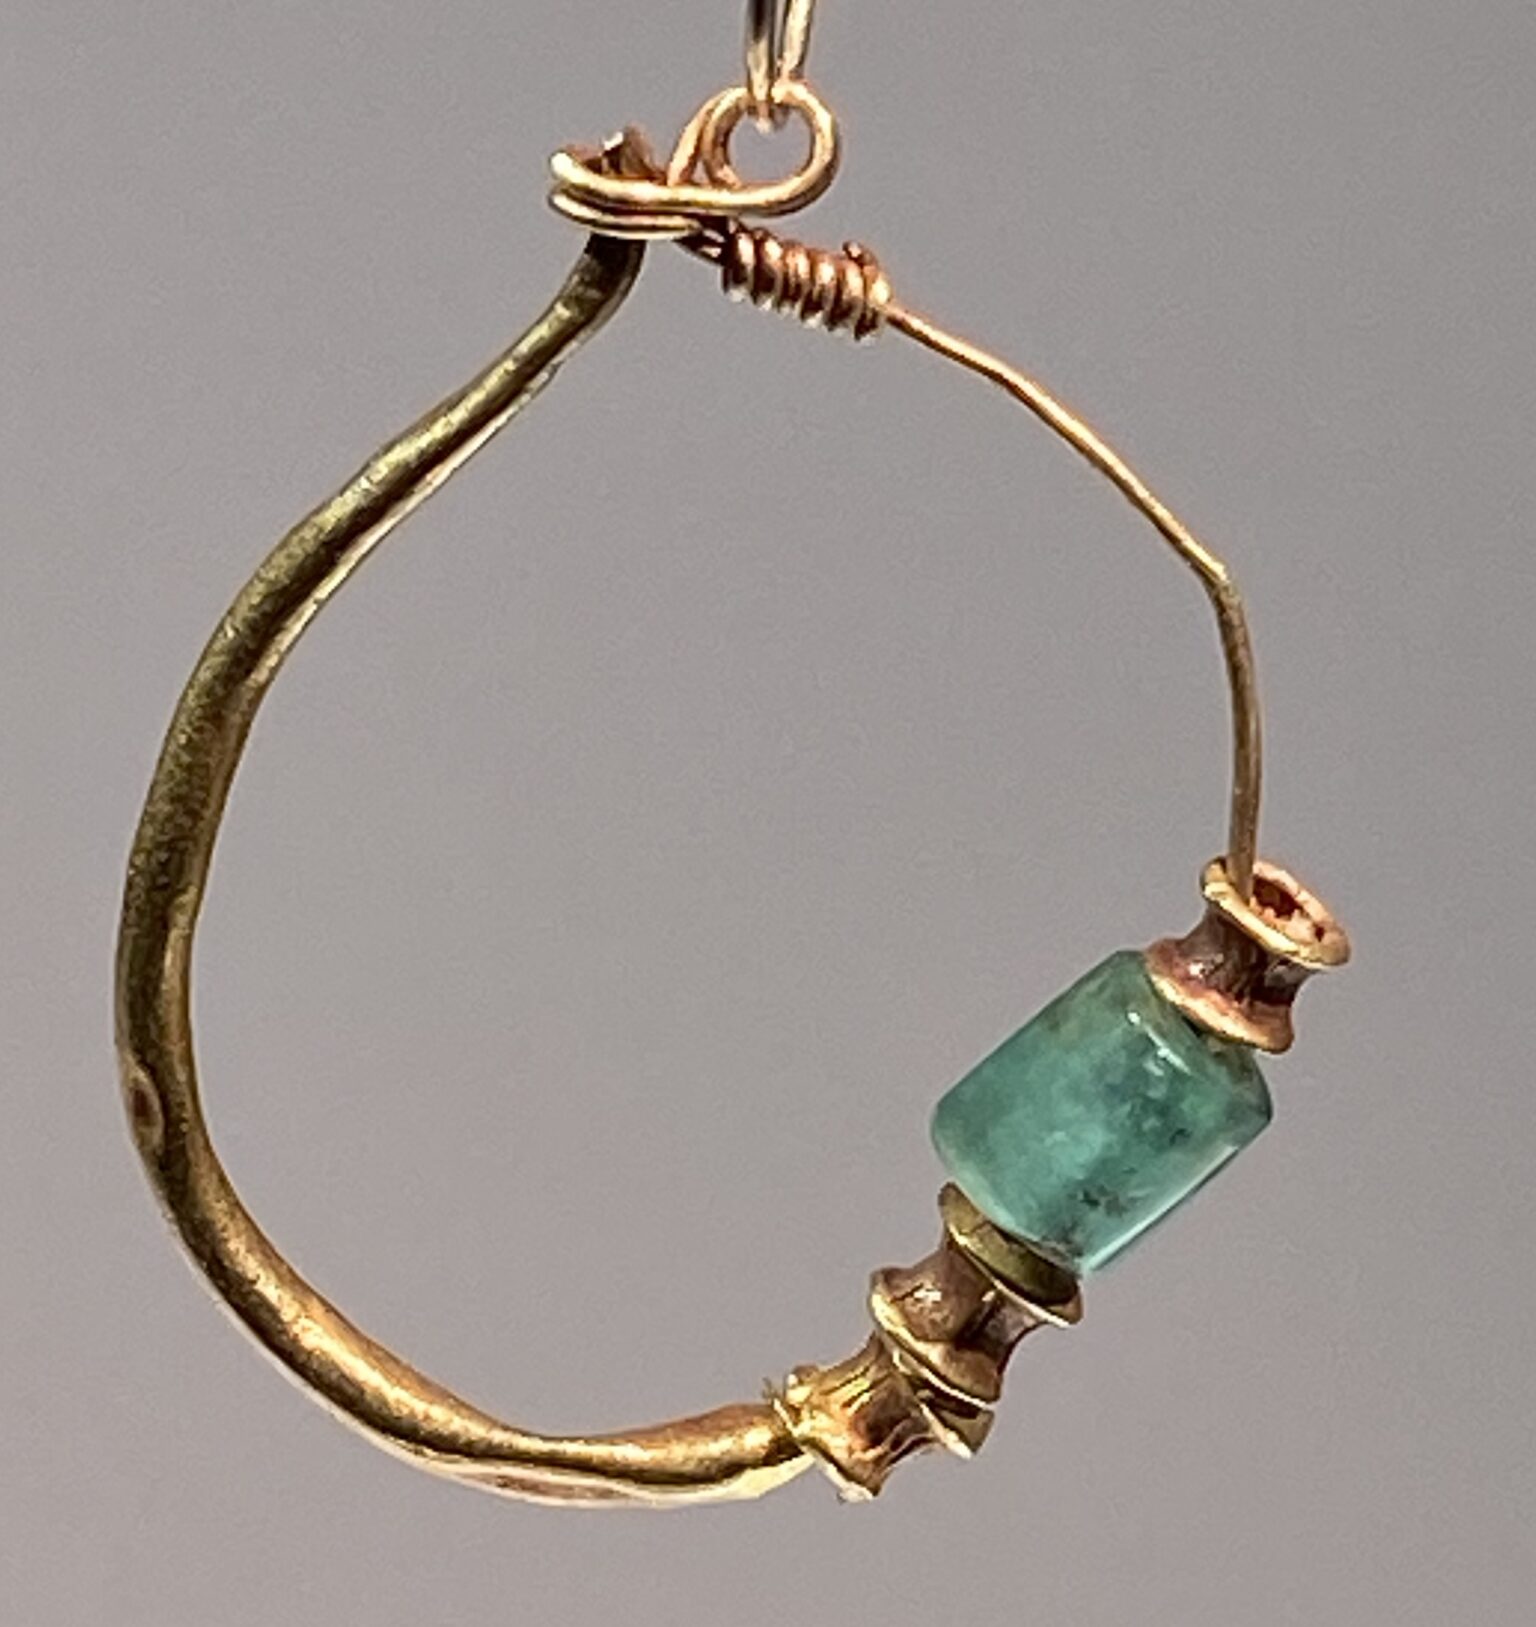 A Single Earring with Emerald Bead